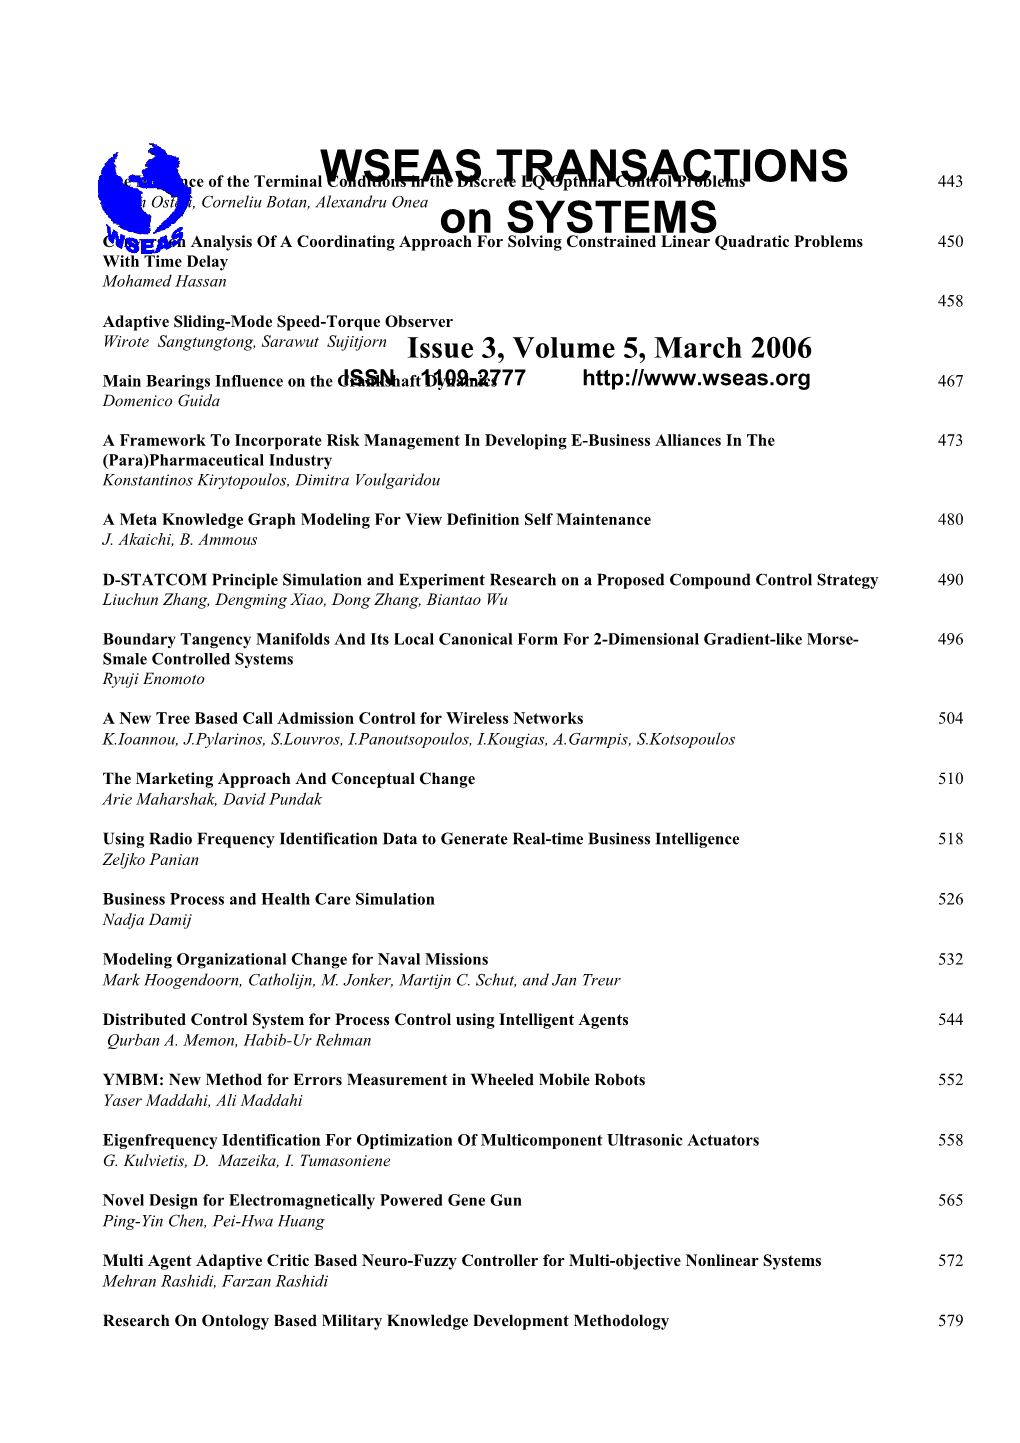 WSEAS Trans. on SYSTEMS, March 2006